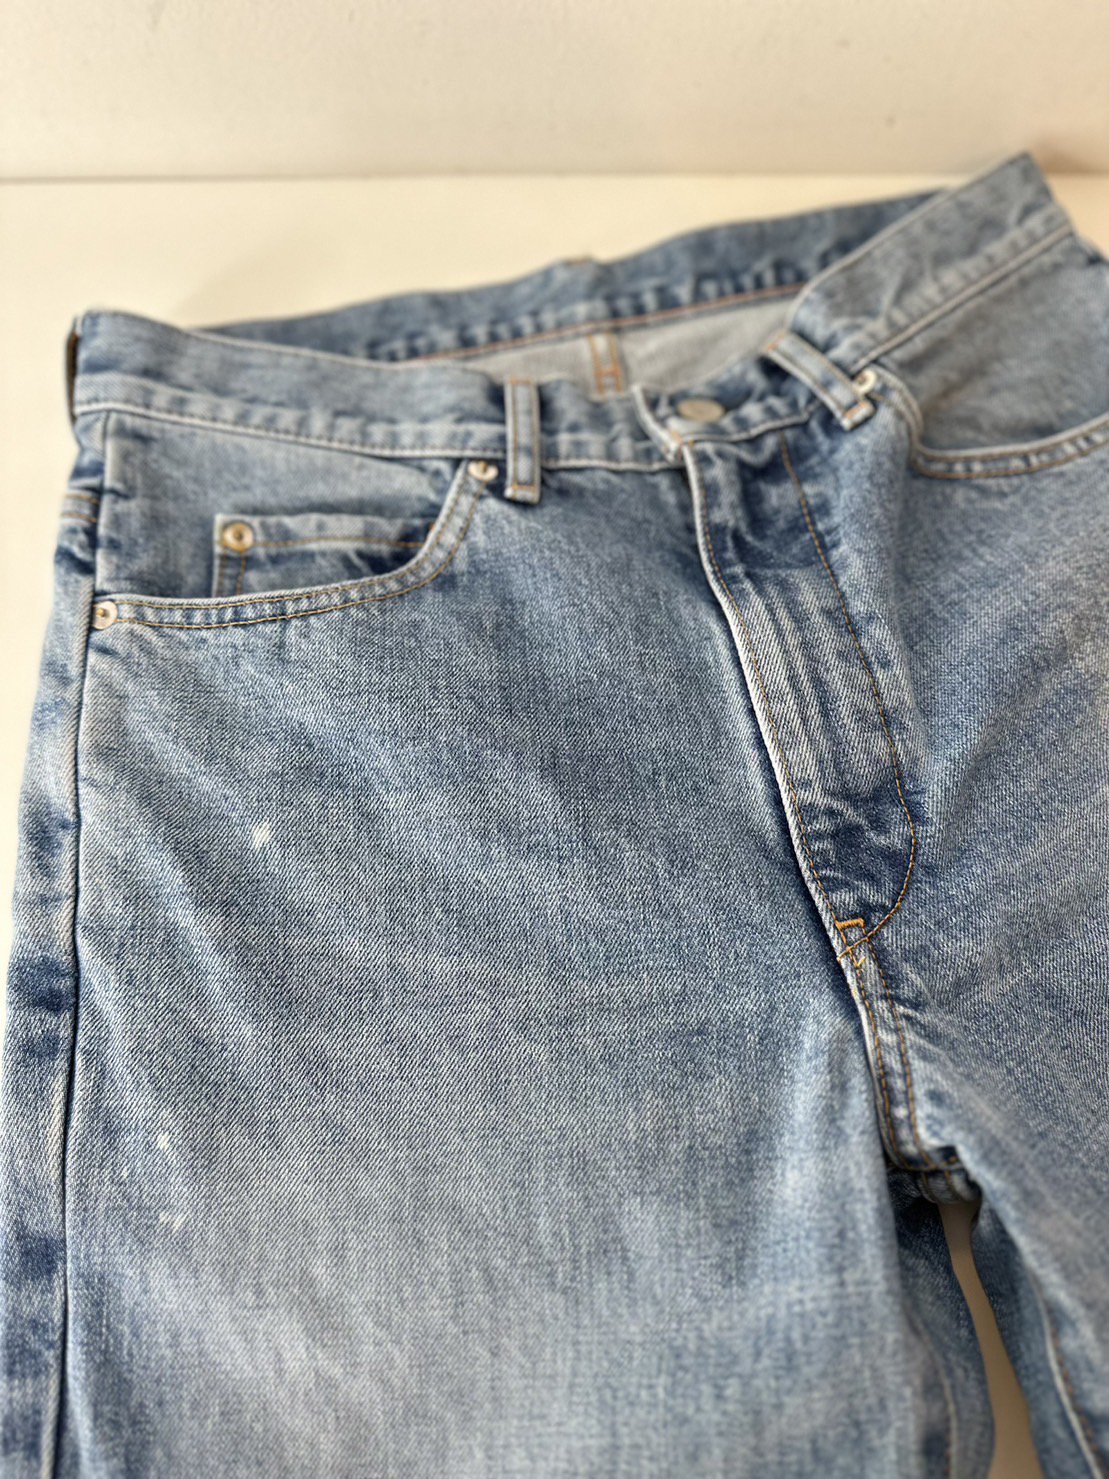 ALLEGE<br />Semi Flare Denim Pants / Blue<img class='new_mark_img2' src='https://img.shop-pro.jp/img/new/icons14.gif' style='border:none;display:inline;margin:0px;padding:0px;width:auto;' />